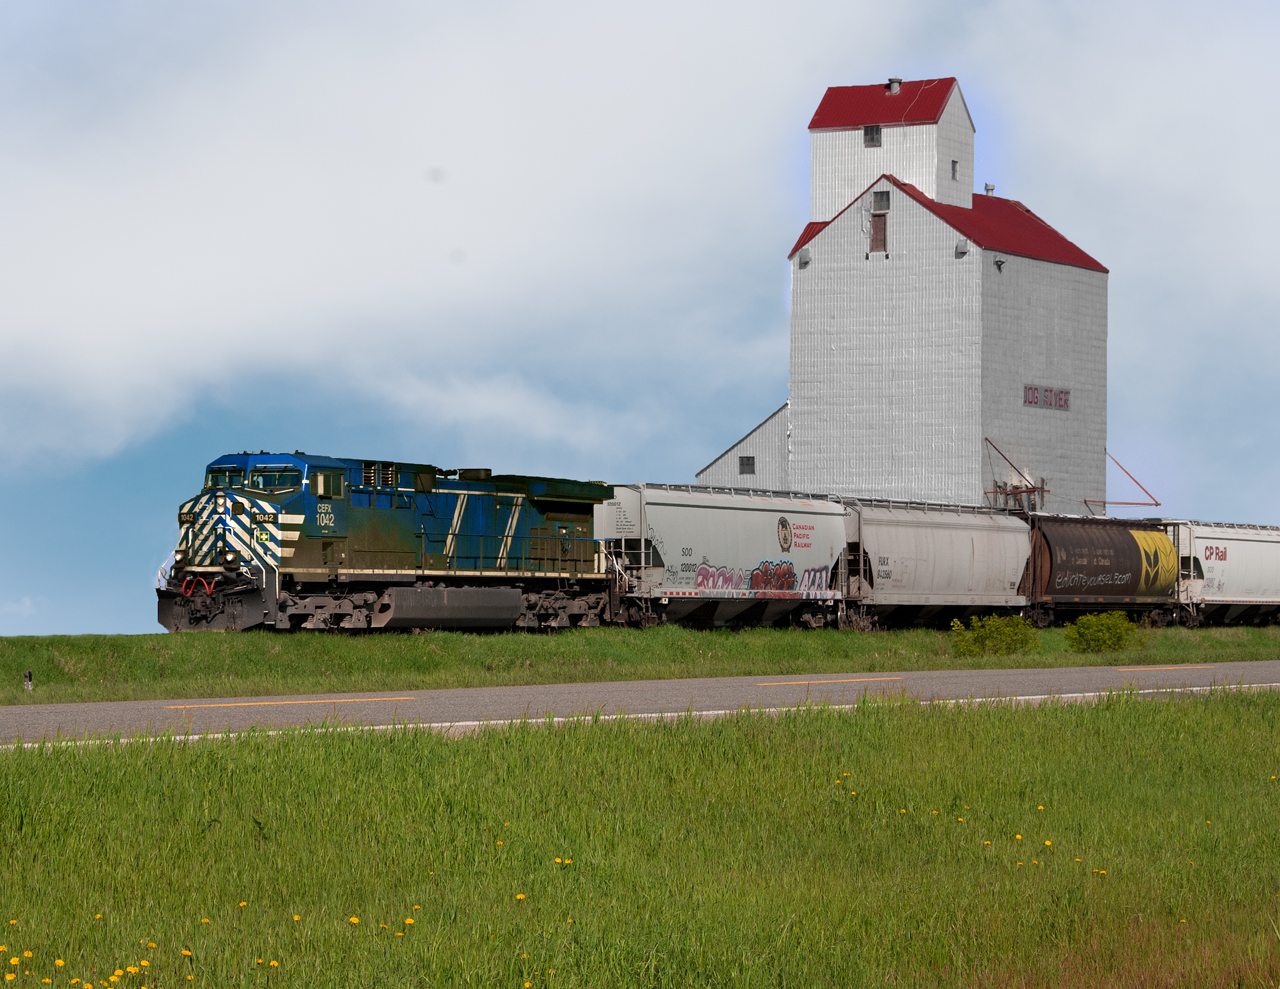 Grain empties from the UP at Kingsgate BC bound for Glenwood MN passes the grain elevator lettered Dog River for the sitcom Corner Gas which was filmed on location here